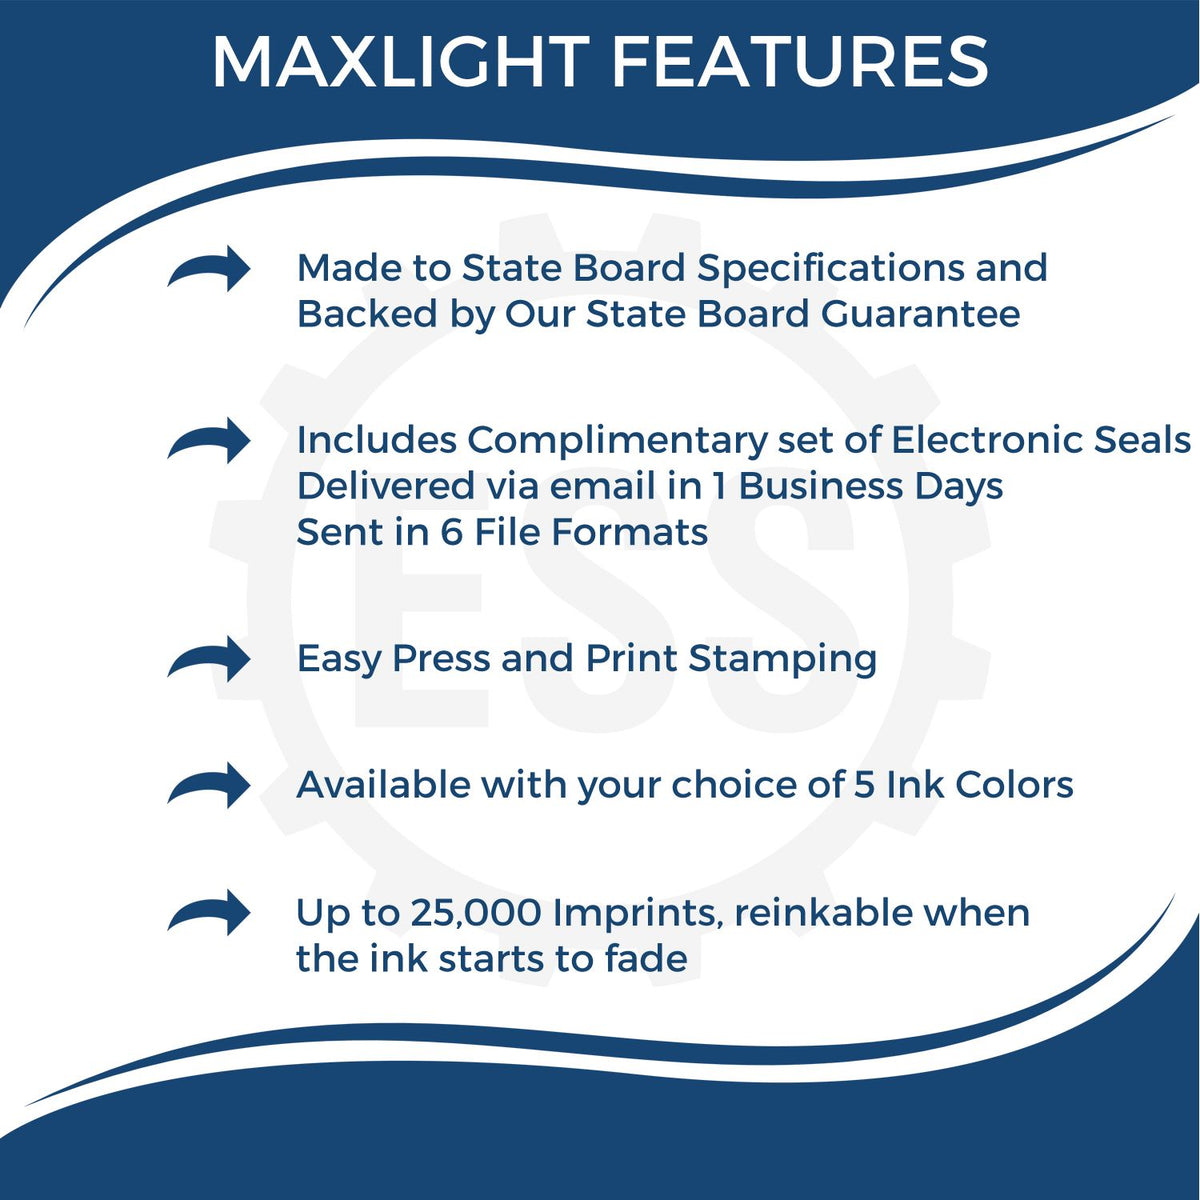 A picture of an infographic highlighting the selling points for the Premium MaxLight Pre-Inked Alaska Geology Stamp